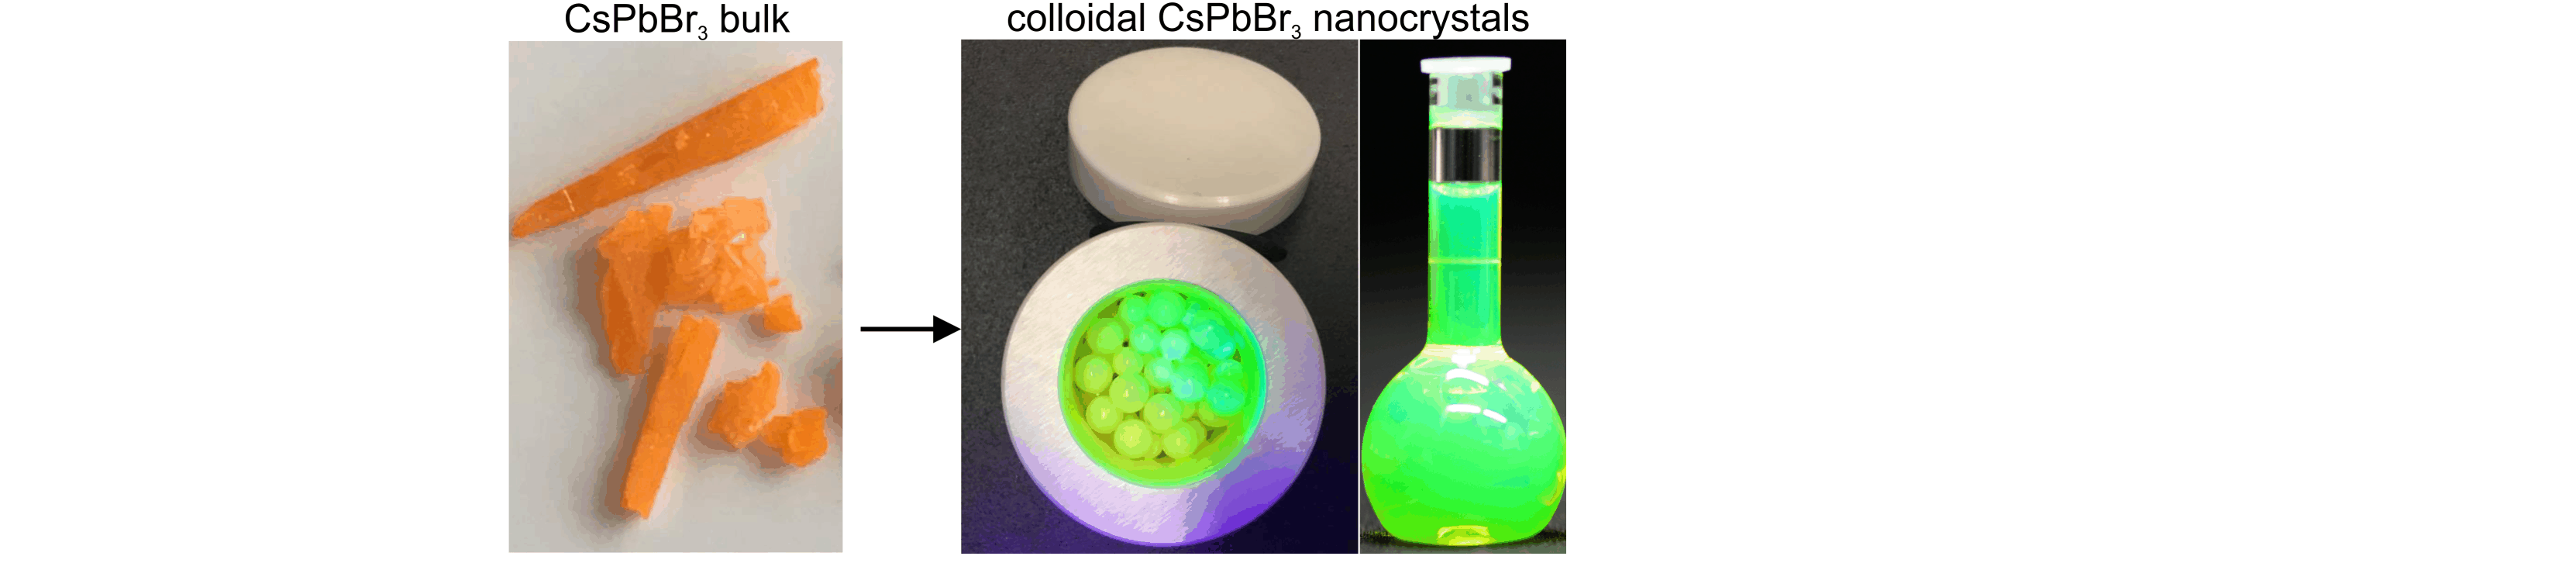 Low-Cost Synthesis of Highly Luminescent Colloidal Lead Halide Perovskite Nanocrystals by Wet Ball Milling